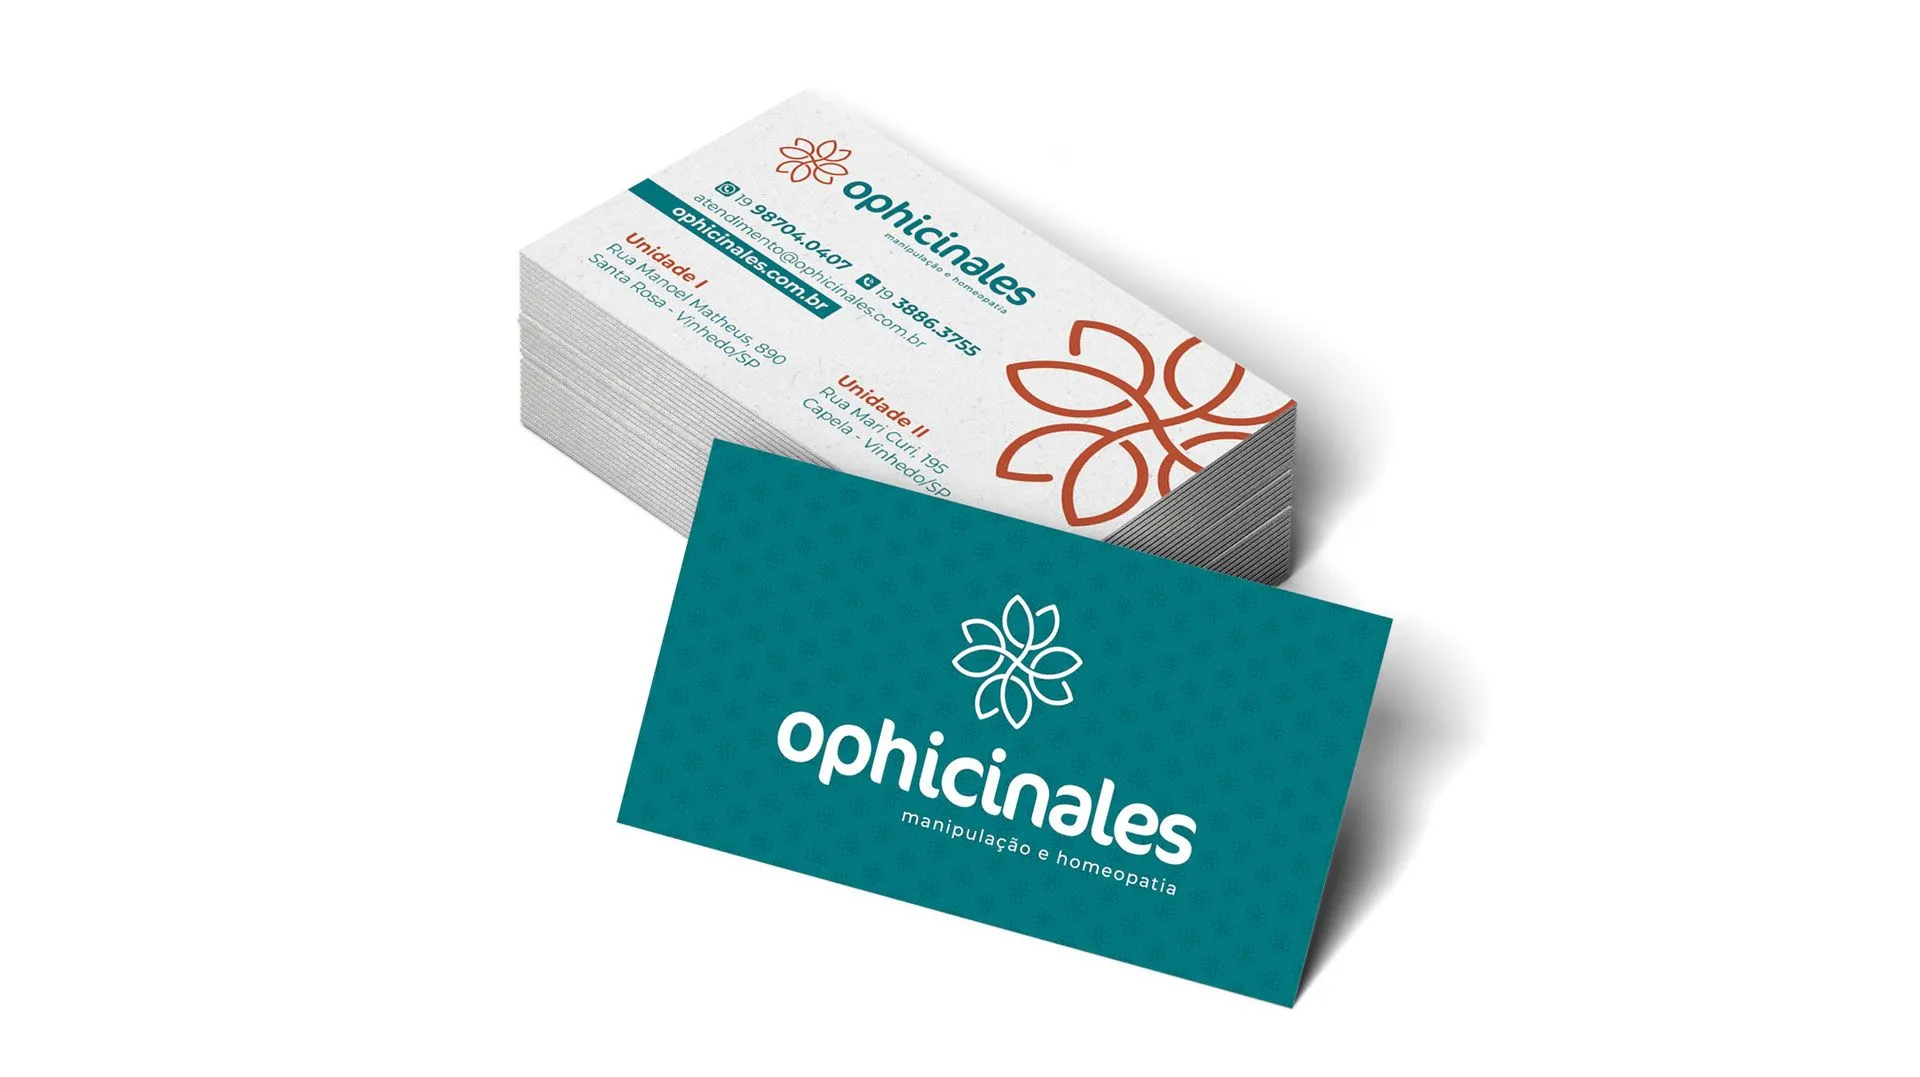 Ophicinales 7